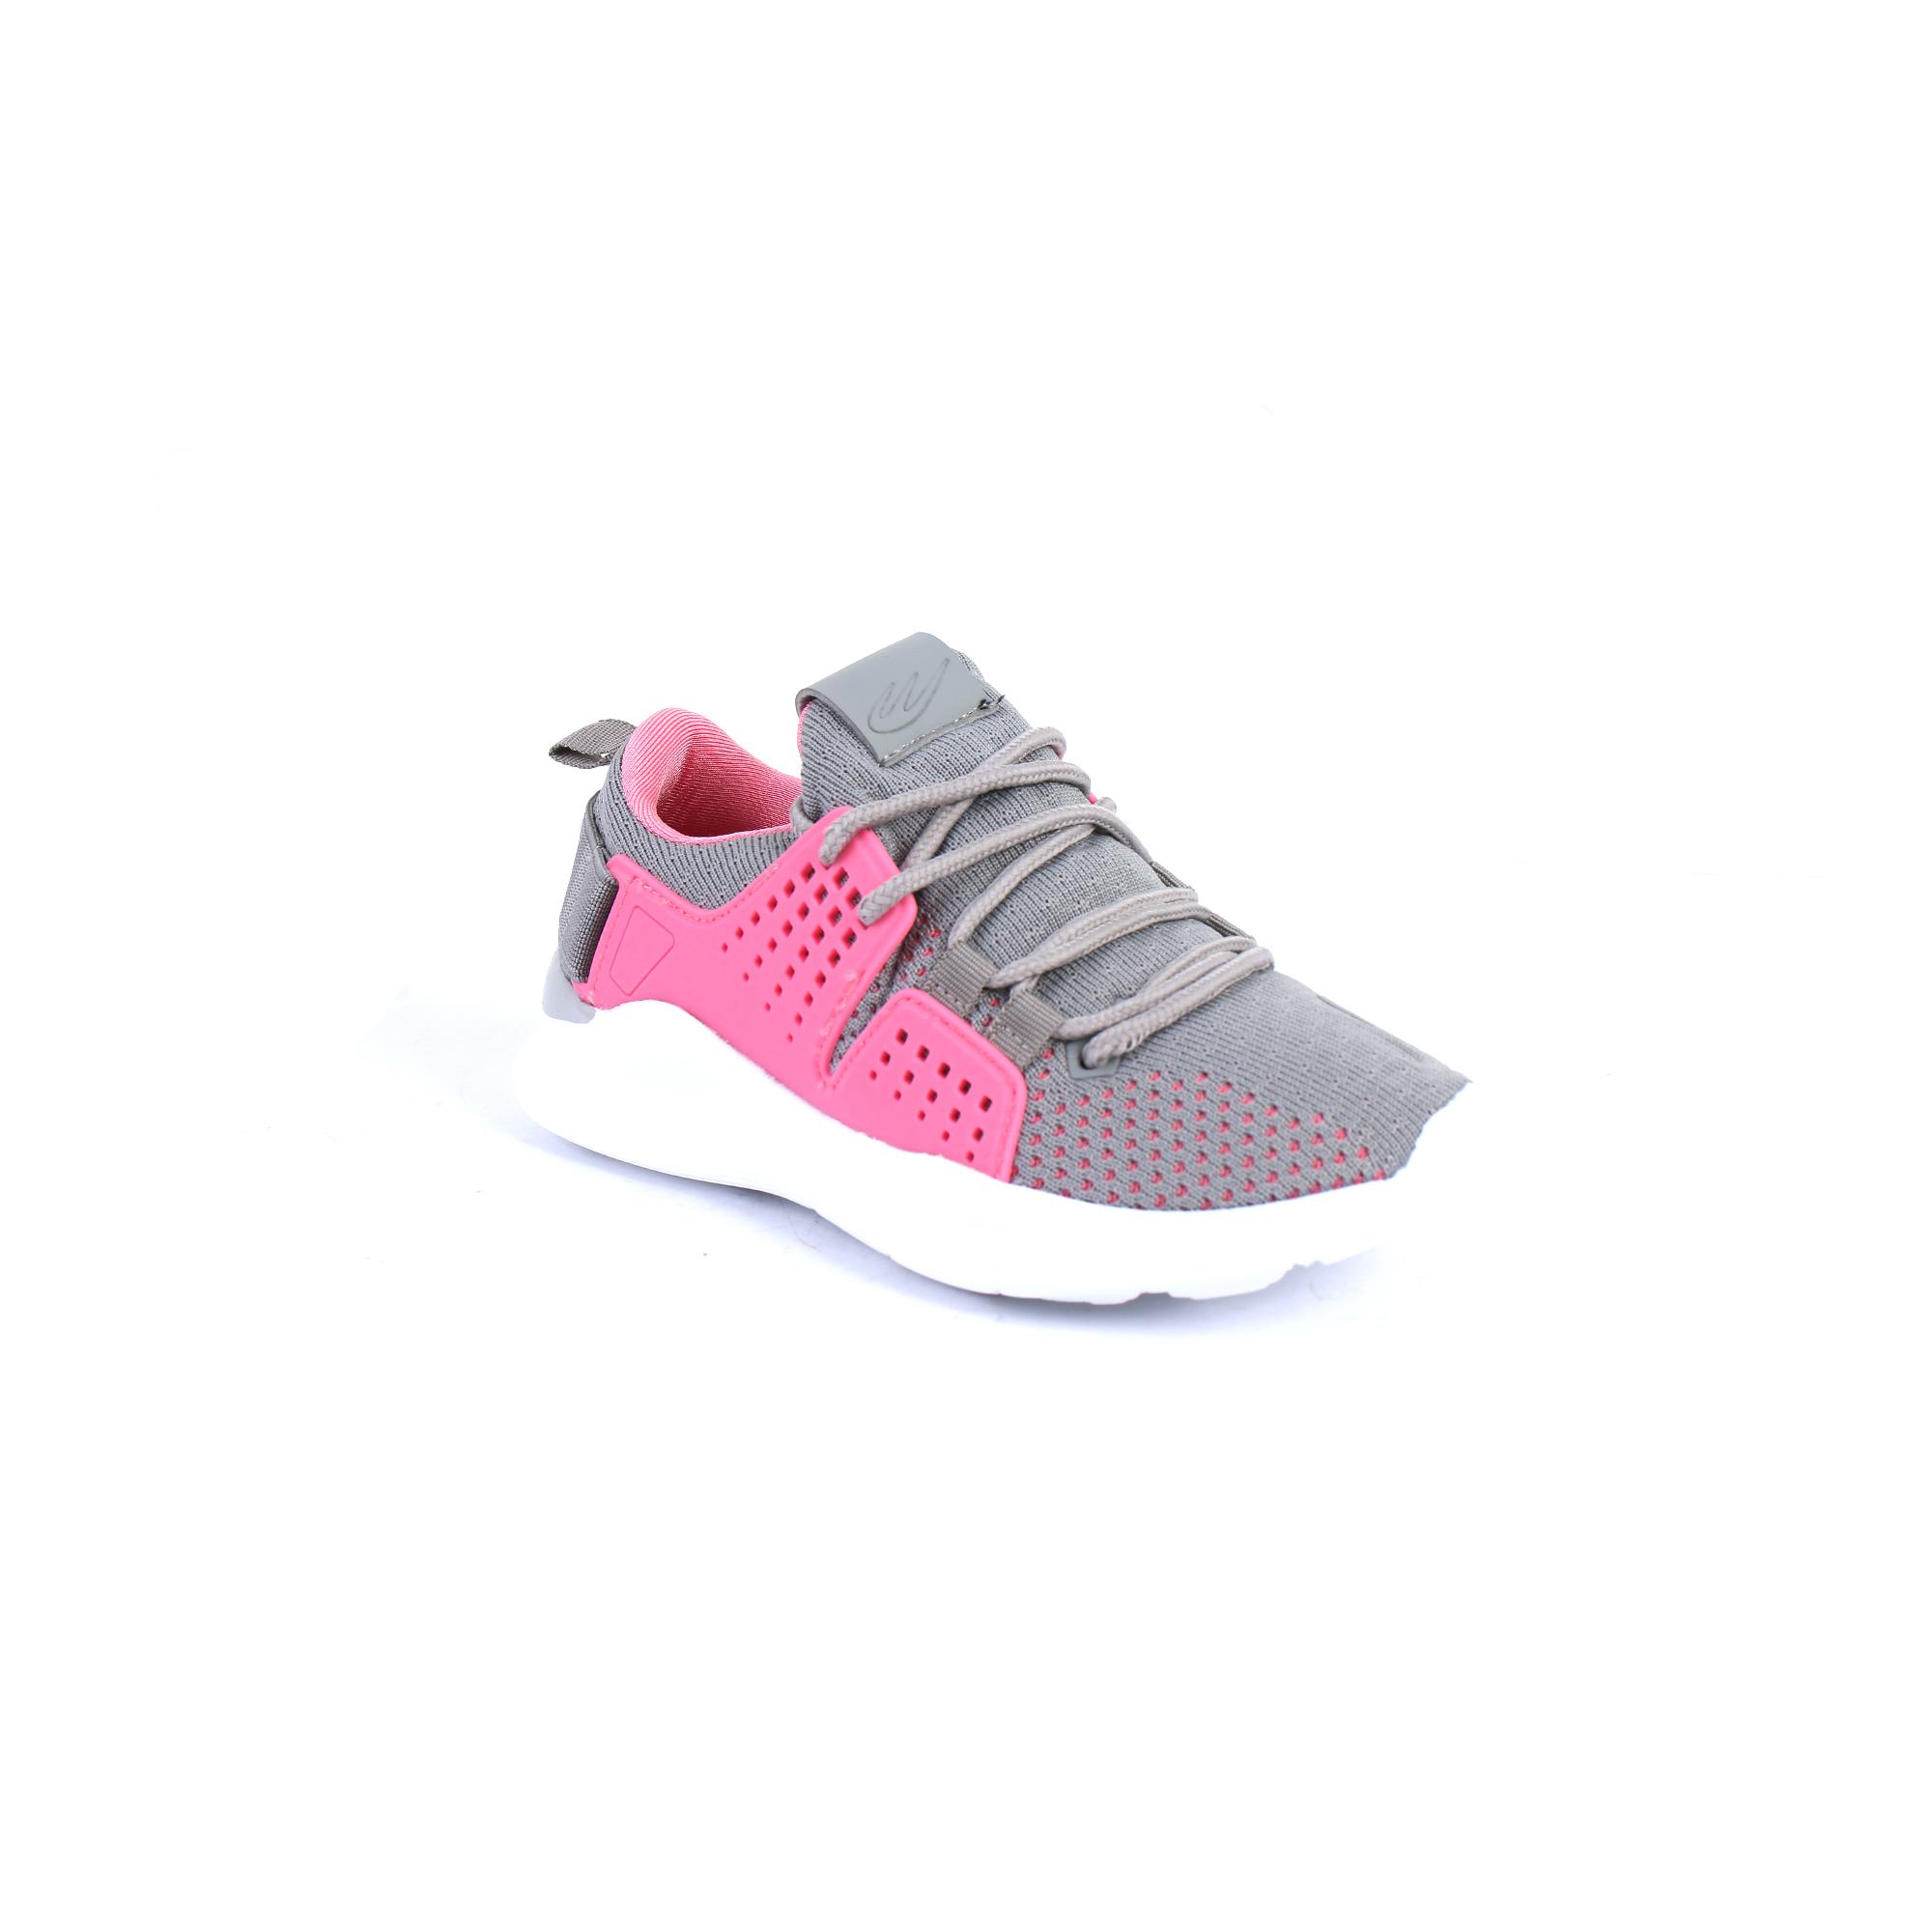 world balance shoes for ladies